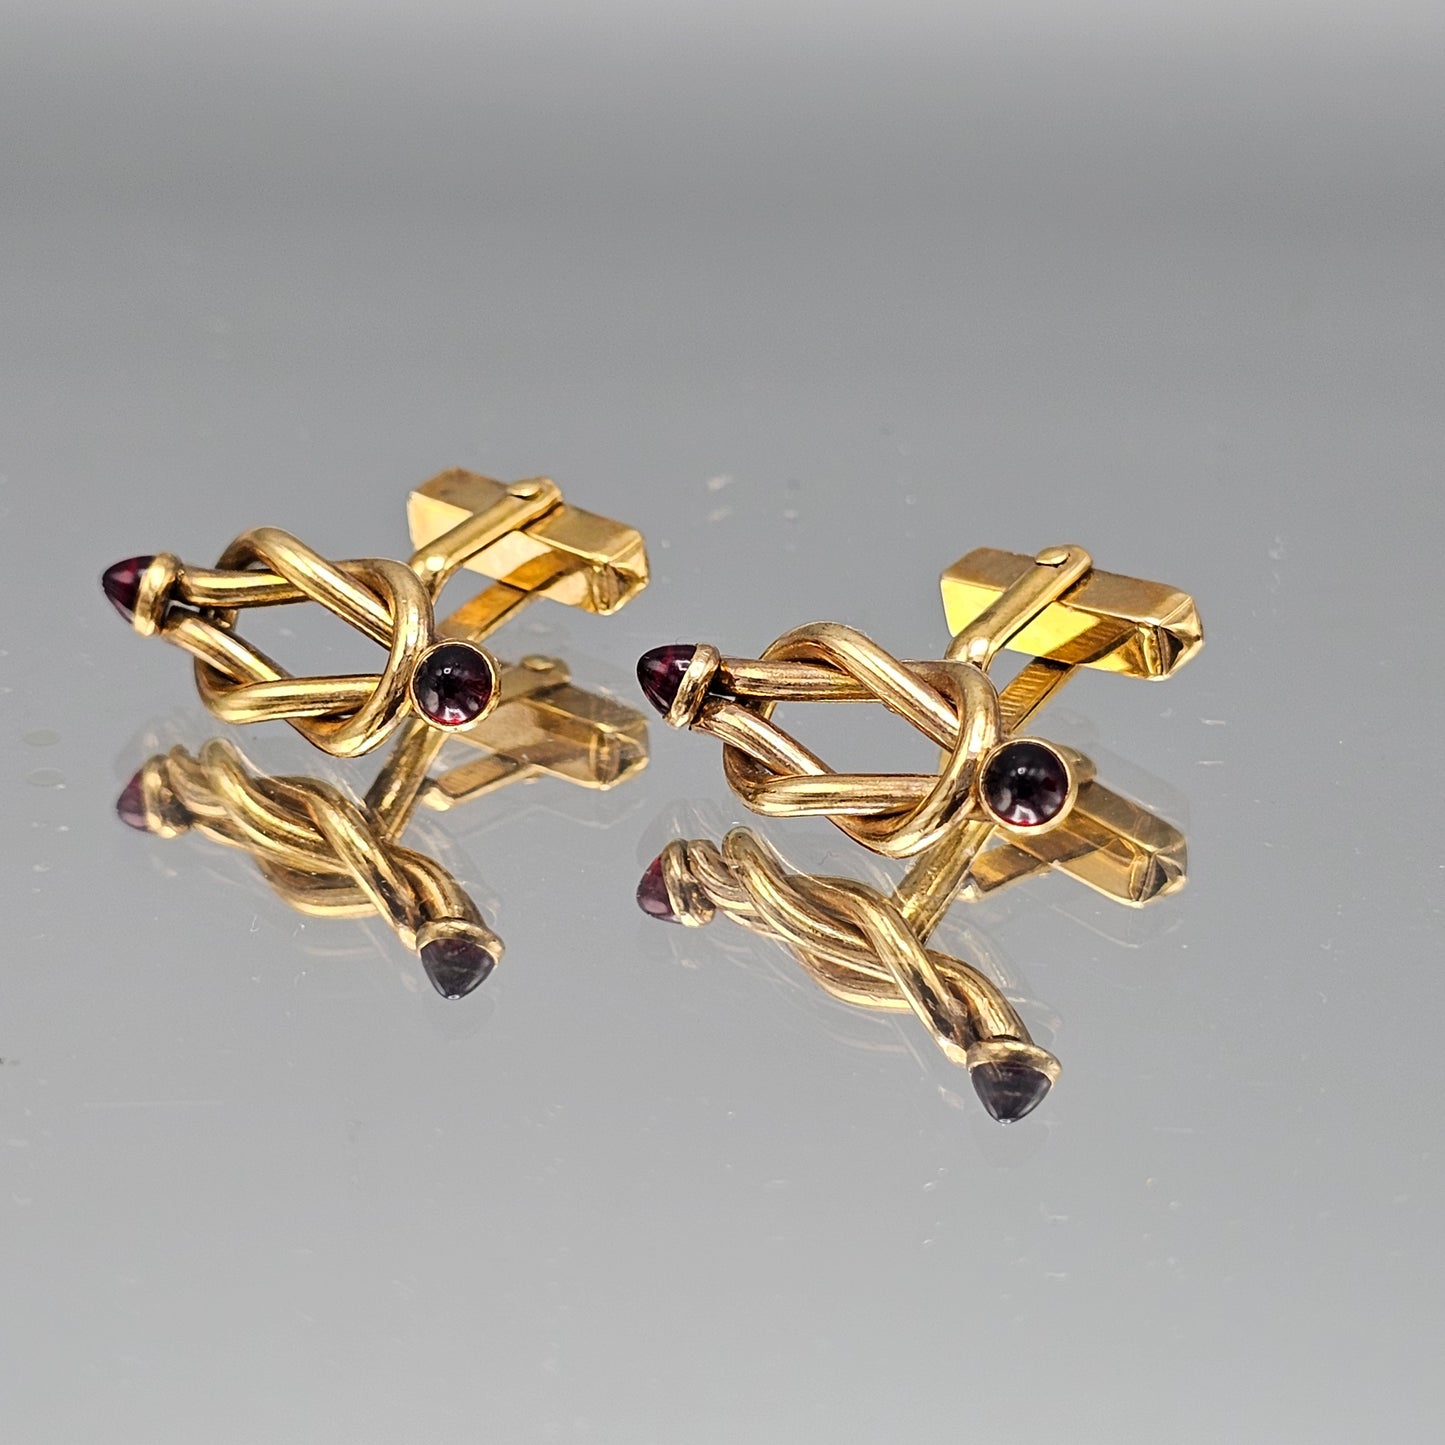 Vintage Swank Gold Plated Knot Design Cufflinks with Red Glass Ends